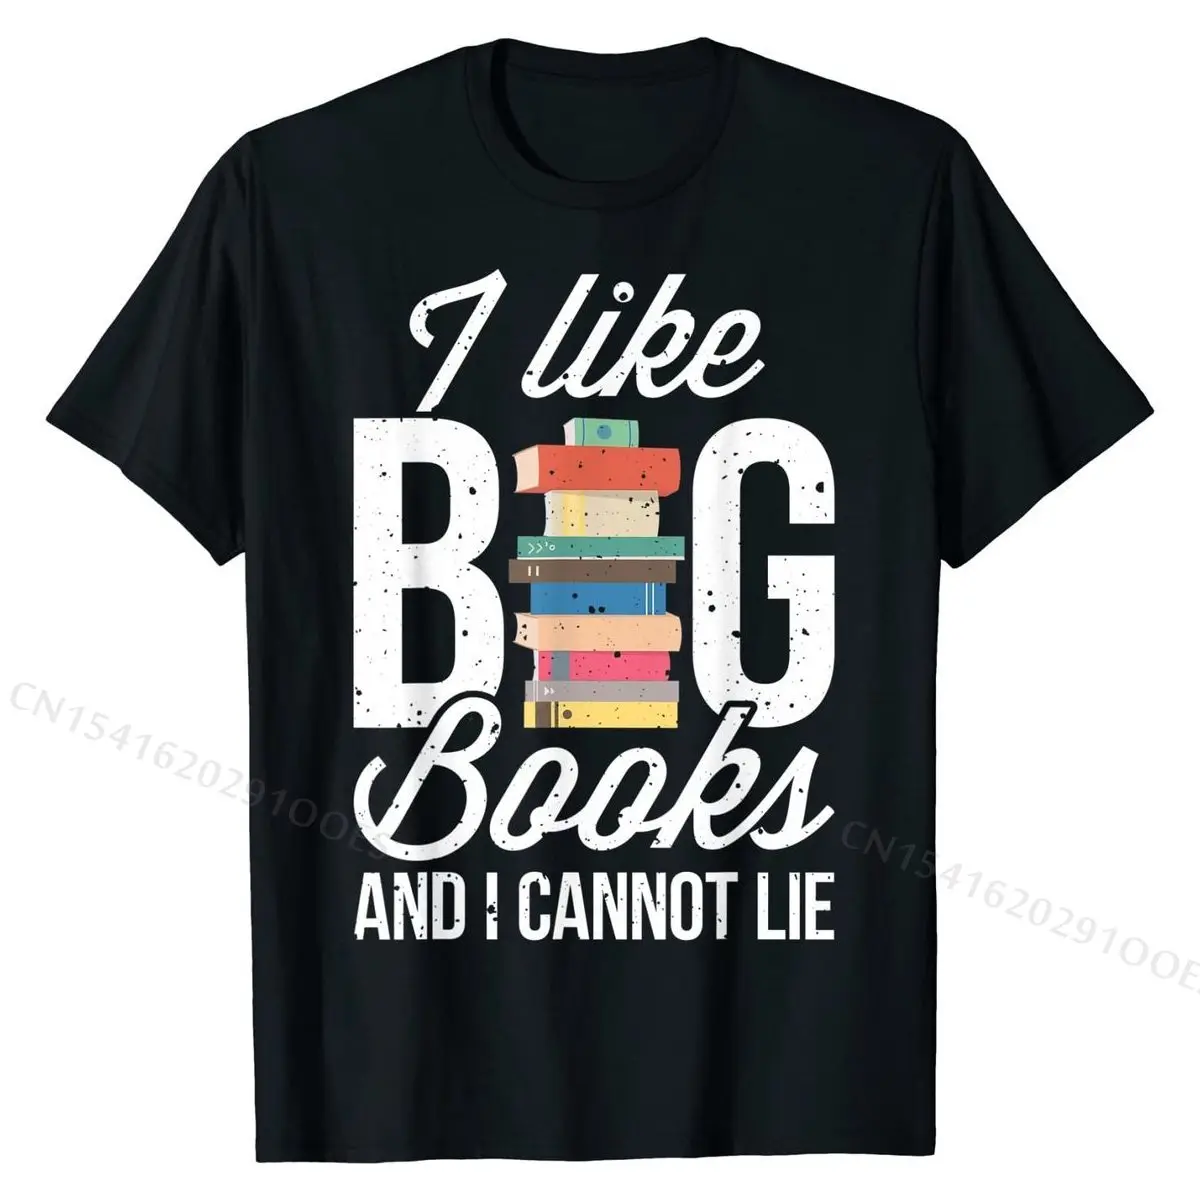 

I Like Big Books And I Cannot Lie T shirt Book Lover Gift T-Shirt Tops Shirt for Men High Quality Cotton Top T-shirts Design